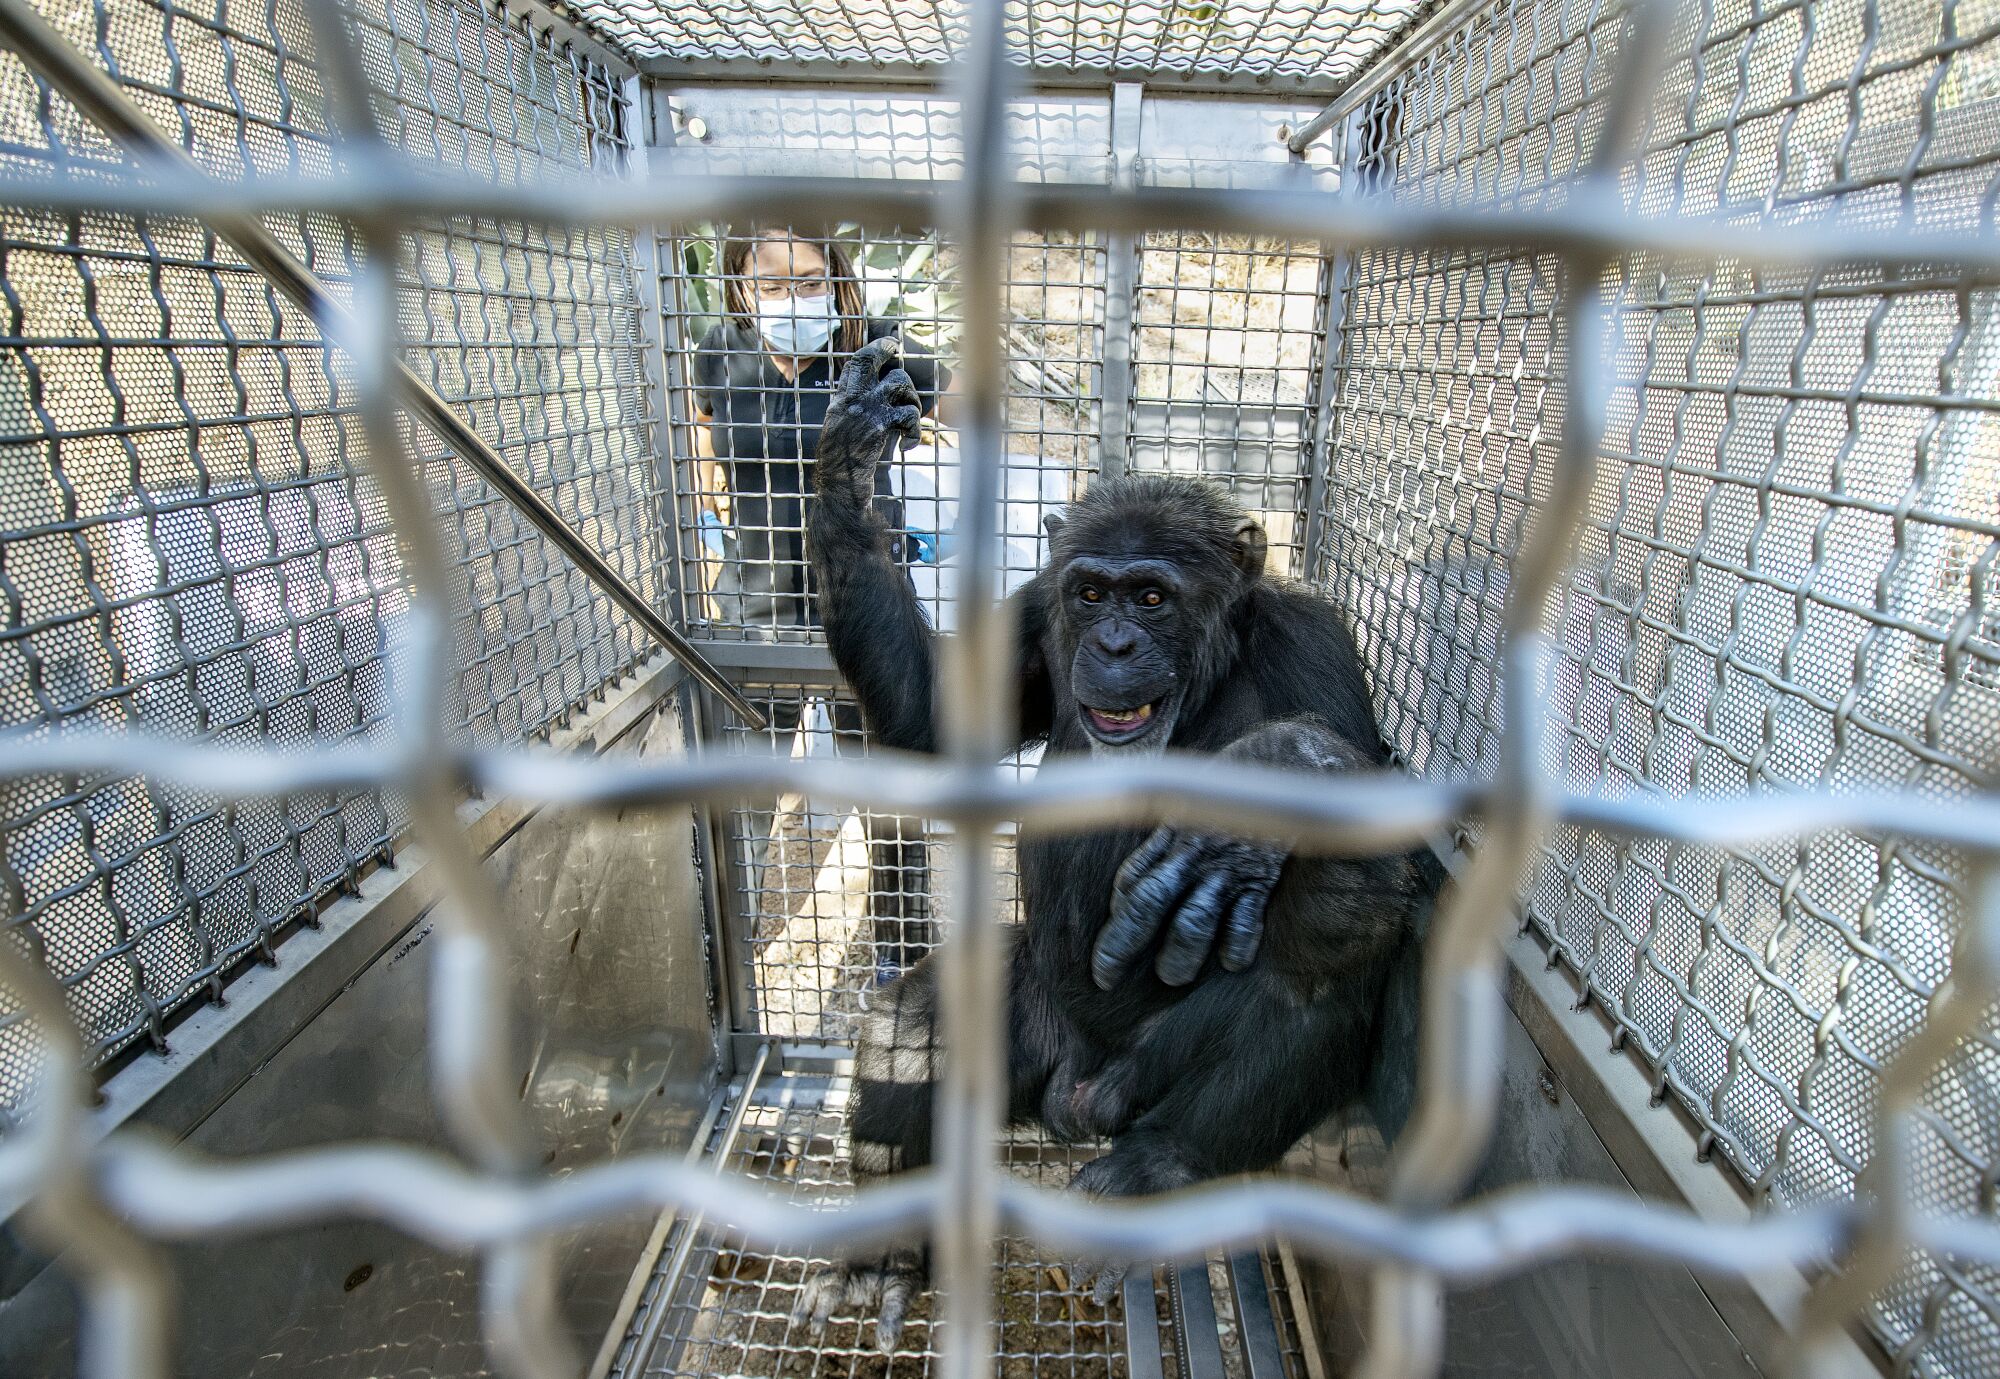 A male chimpanzee in a transport cage